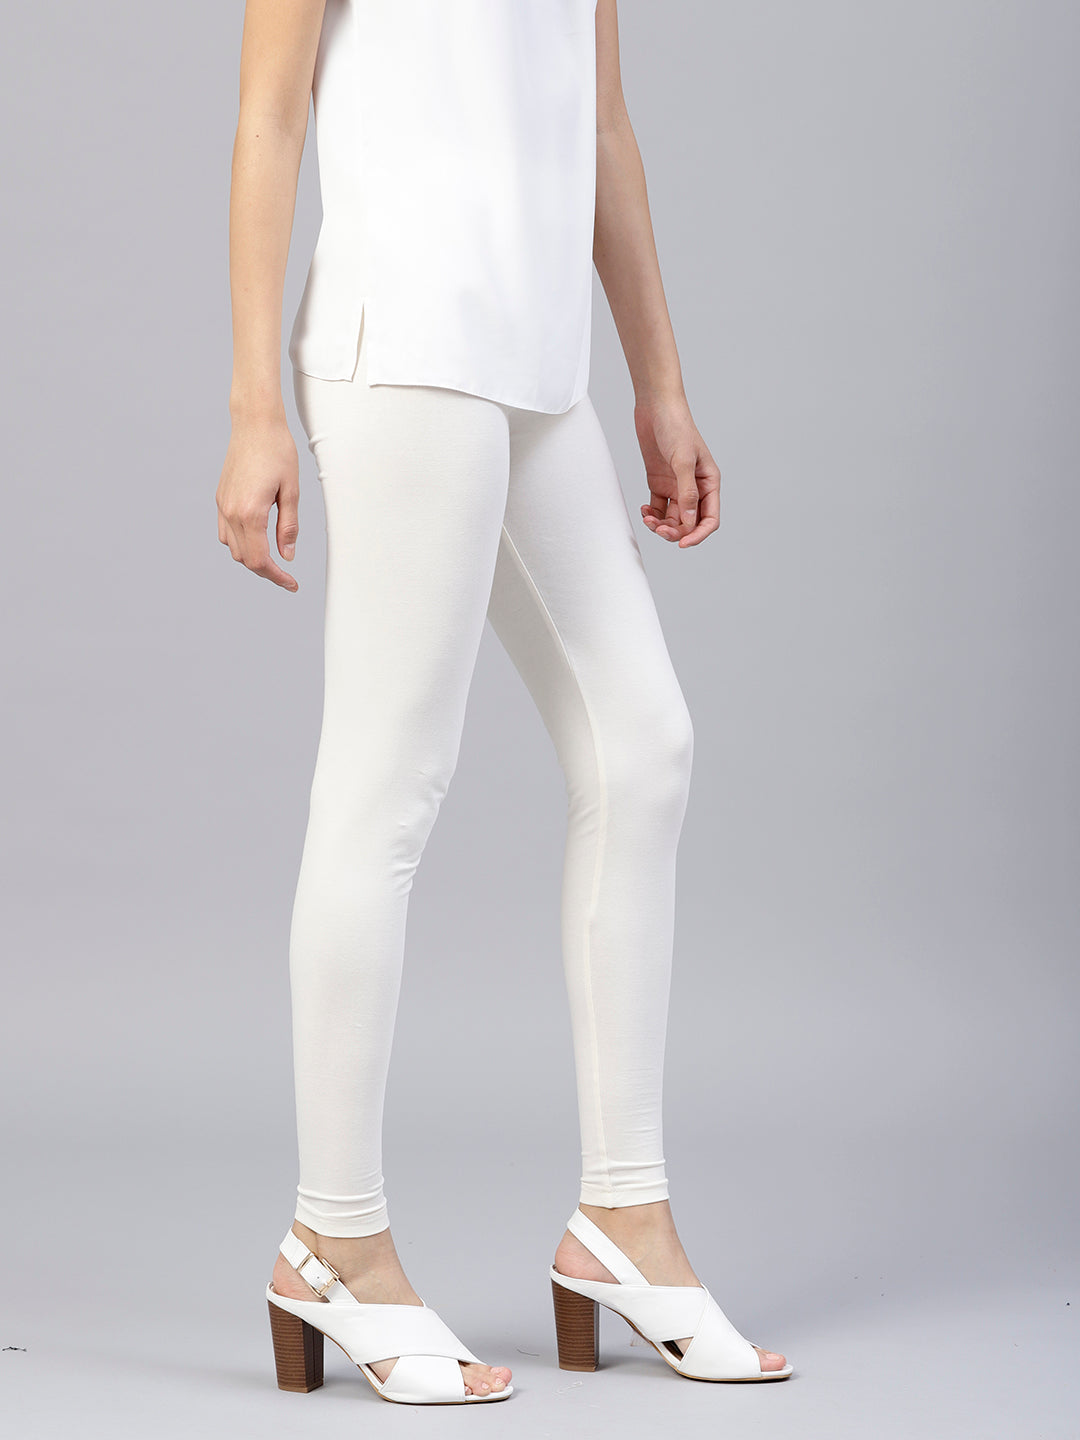 Off White Solid Cotton Lycra Leggings